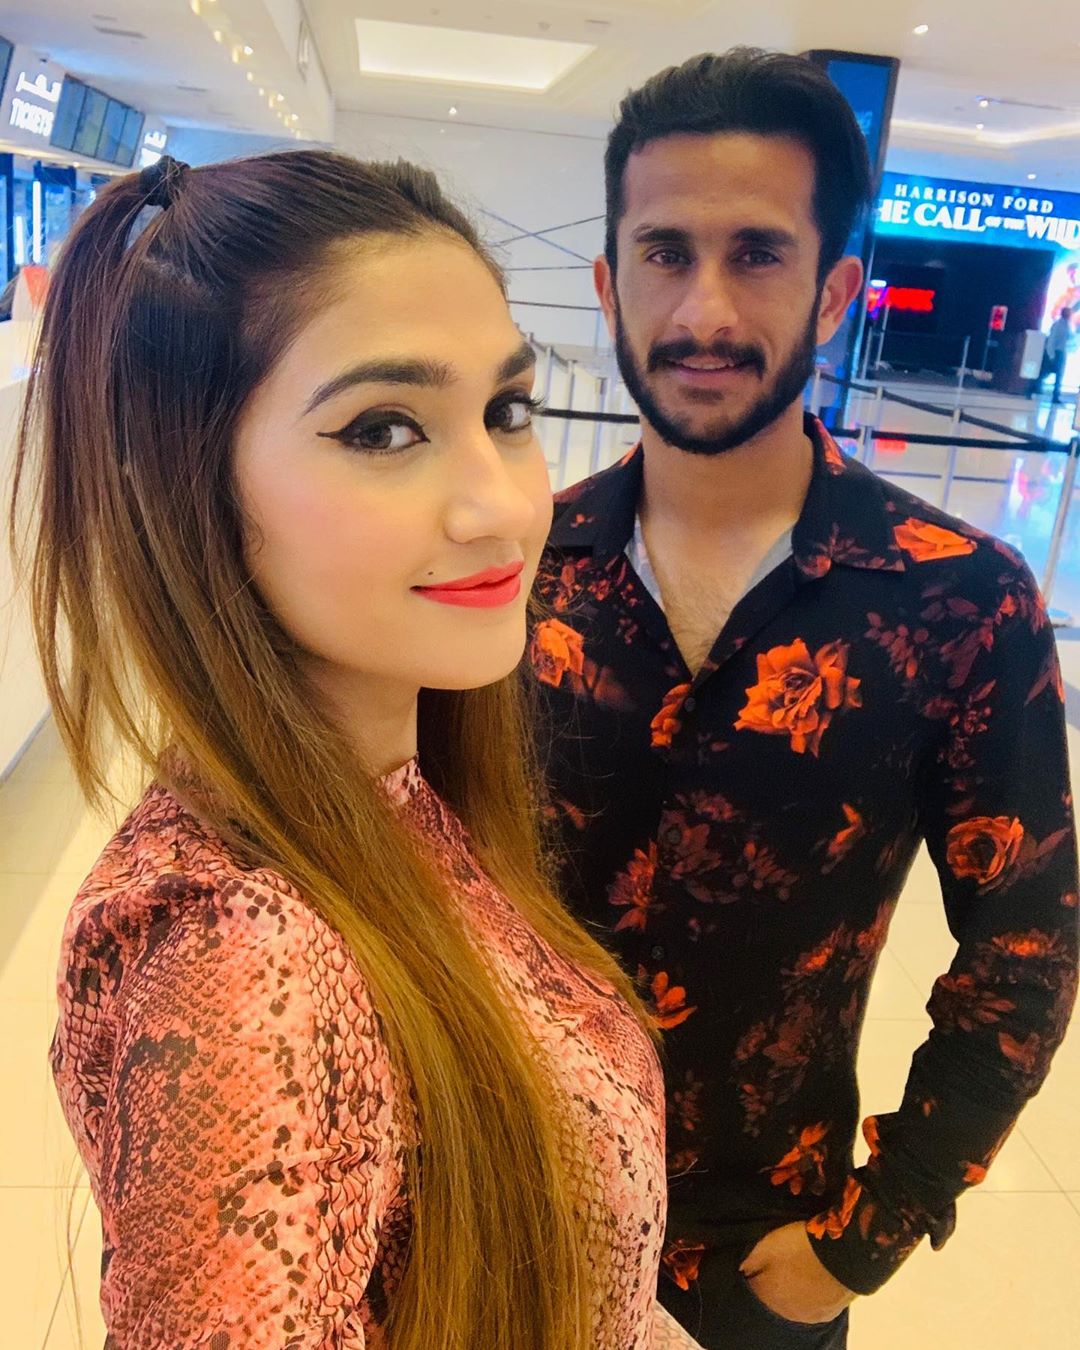 Hassan Ali Latest Pictures with his Wife Samiya Arzoo